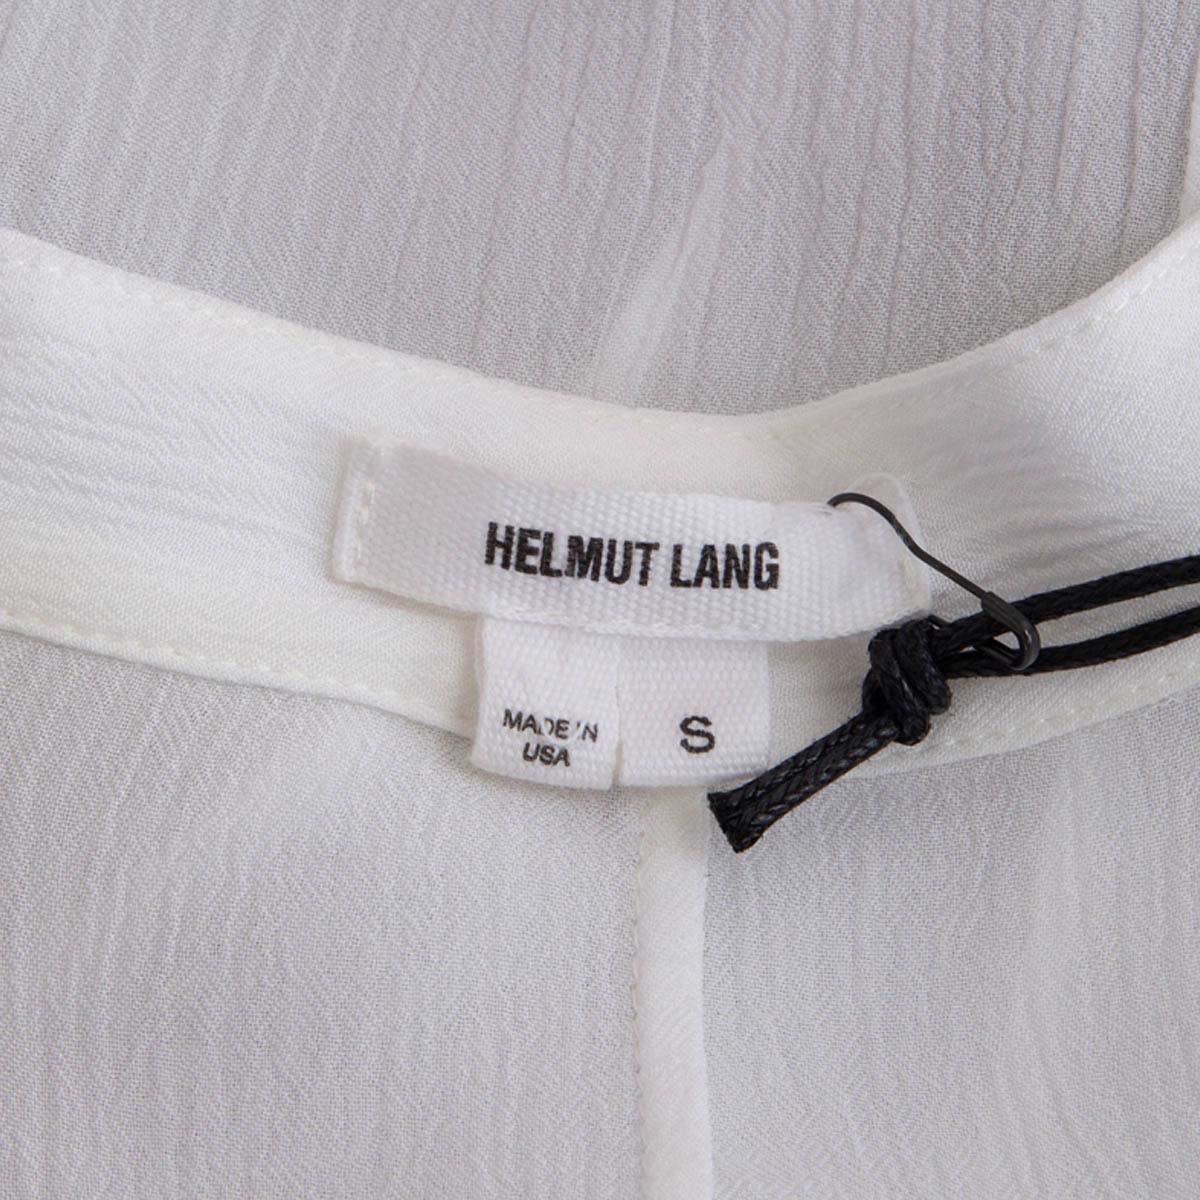 HELMUT LANG white viscose CRINKLED SHEER Button Down Shirt S In Excellent Condition For Sale In Zürich, CH